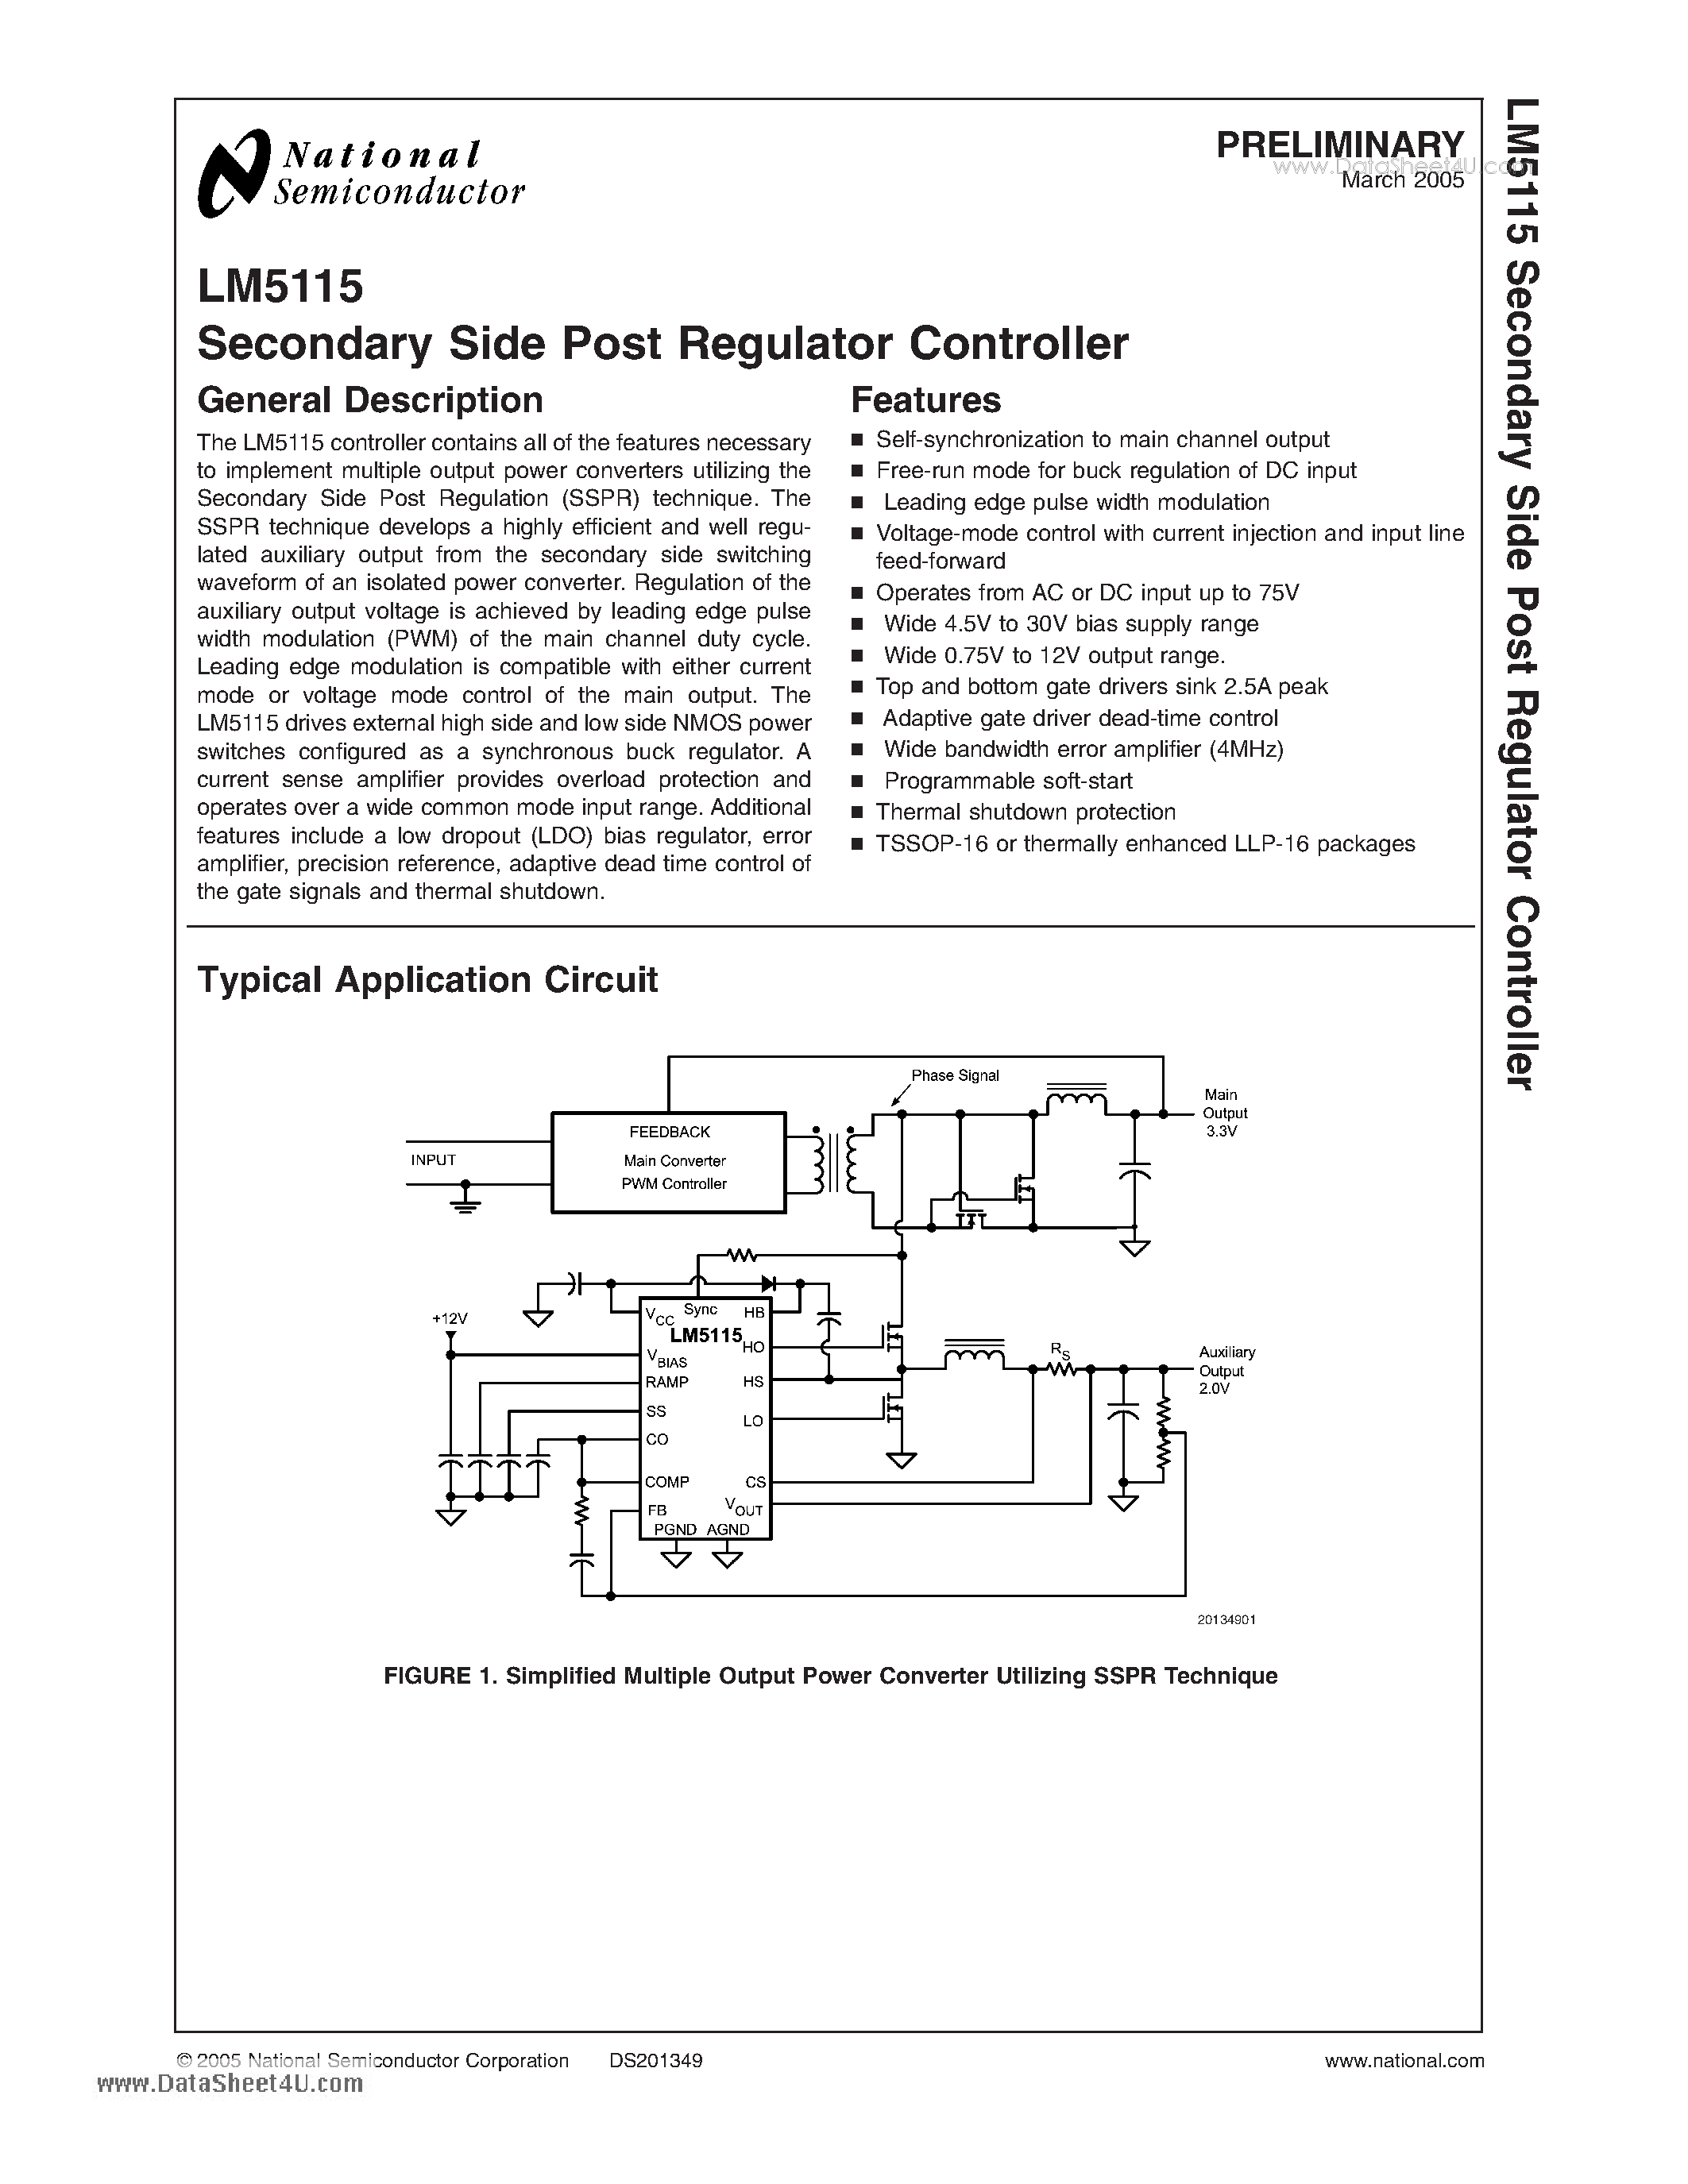 Datasheet LM5115 - Secondary Side Post Regulator Controller page 1